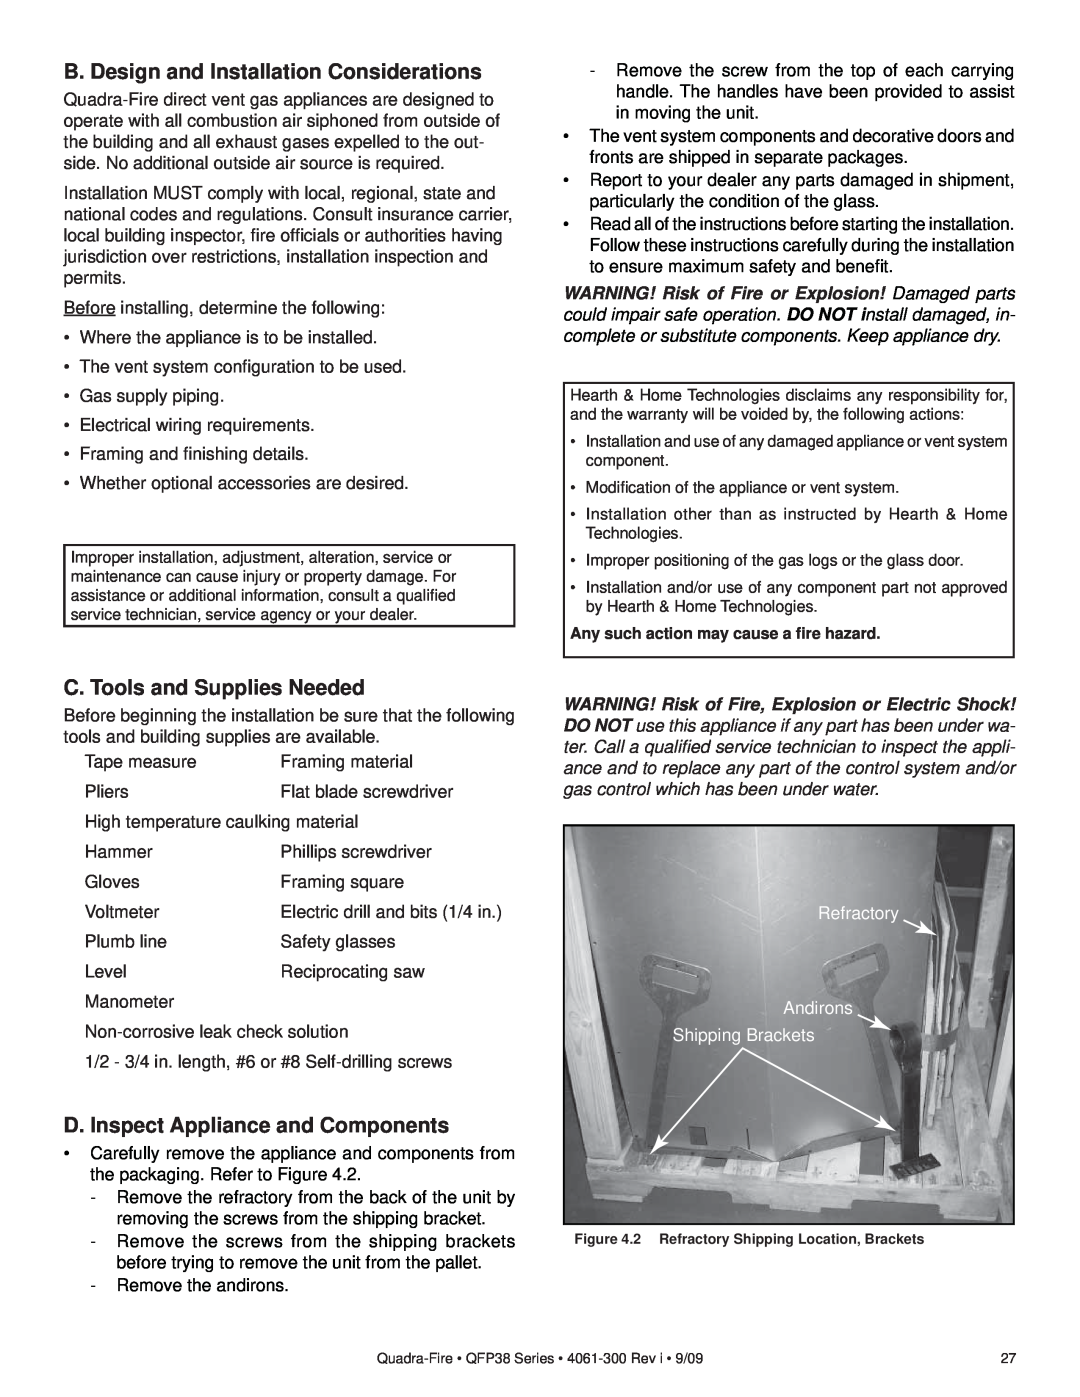 Quadra-Fire QFP38-LP, QFP38-NG owner manual B. Design and Installation Considerations, C. Tools and Supplies Needed 